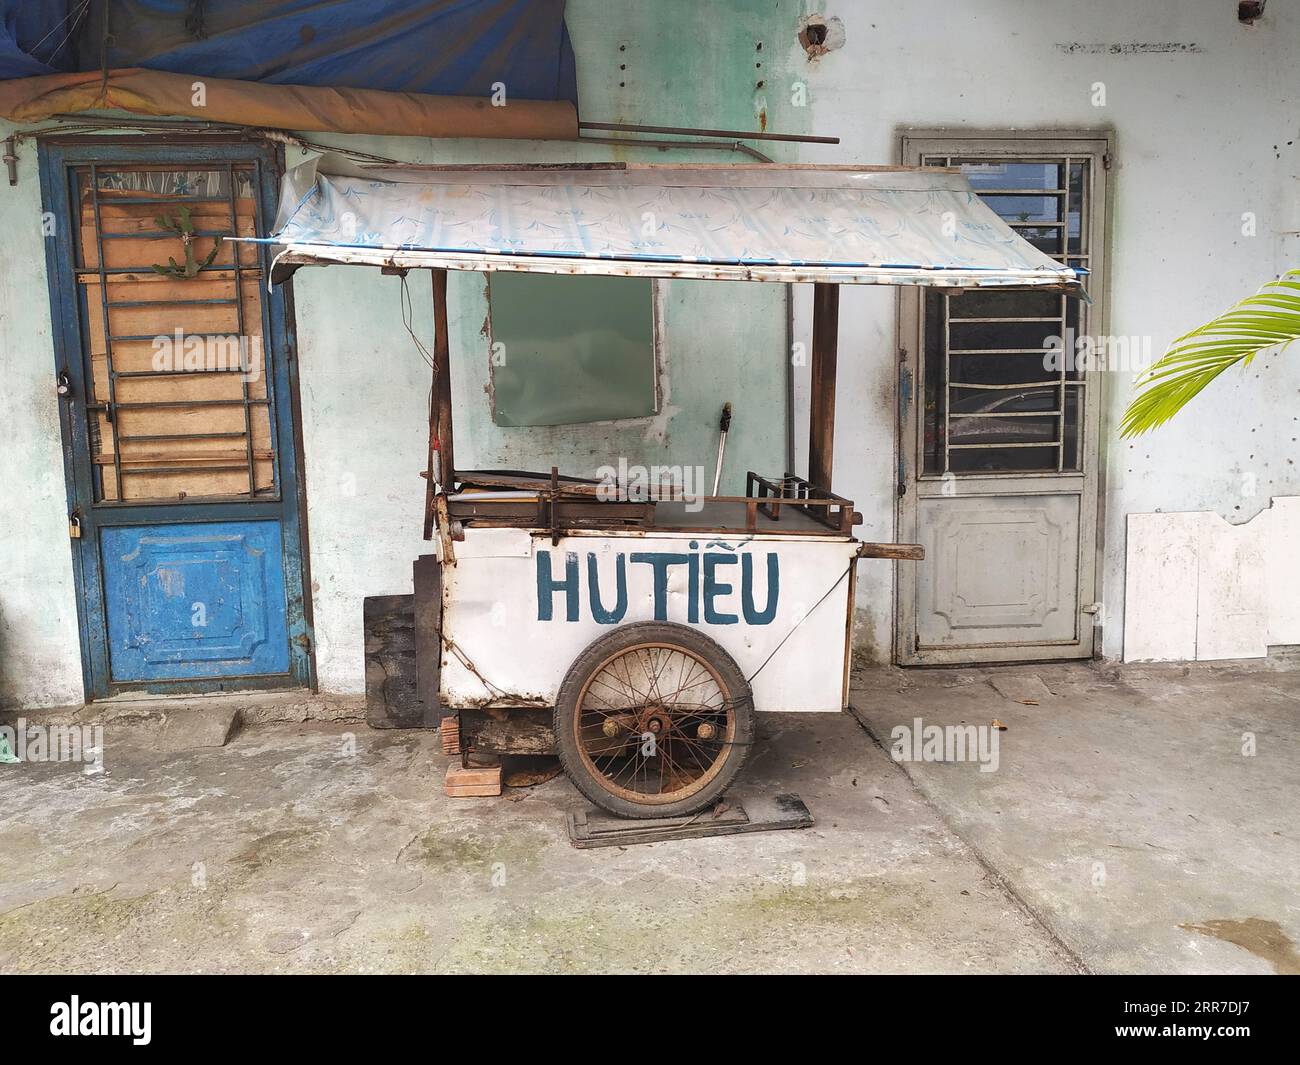 Funky food cart offering Hutieu, a type of flat rice noodle popular in southern Vietnam. Idle now, the cart will move to a busy street at dinner time Stock Photo